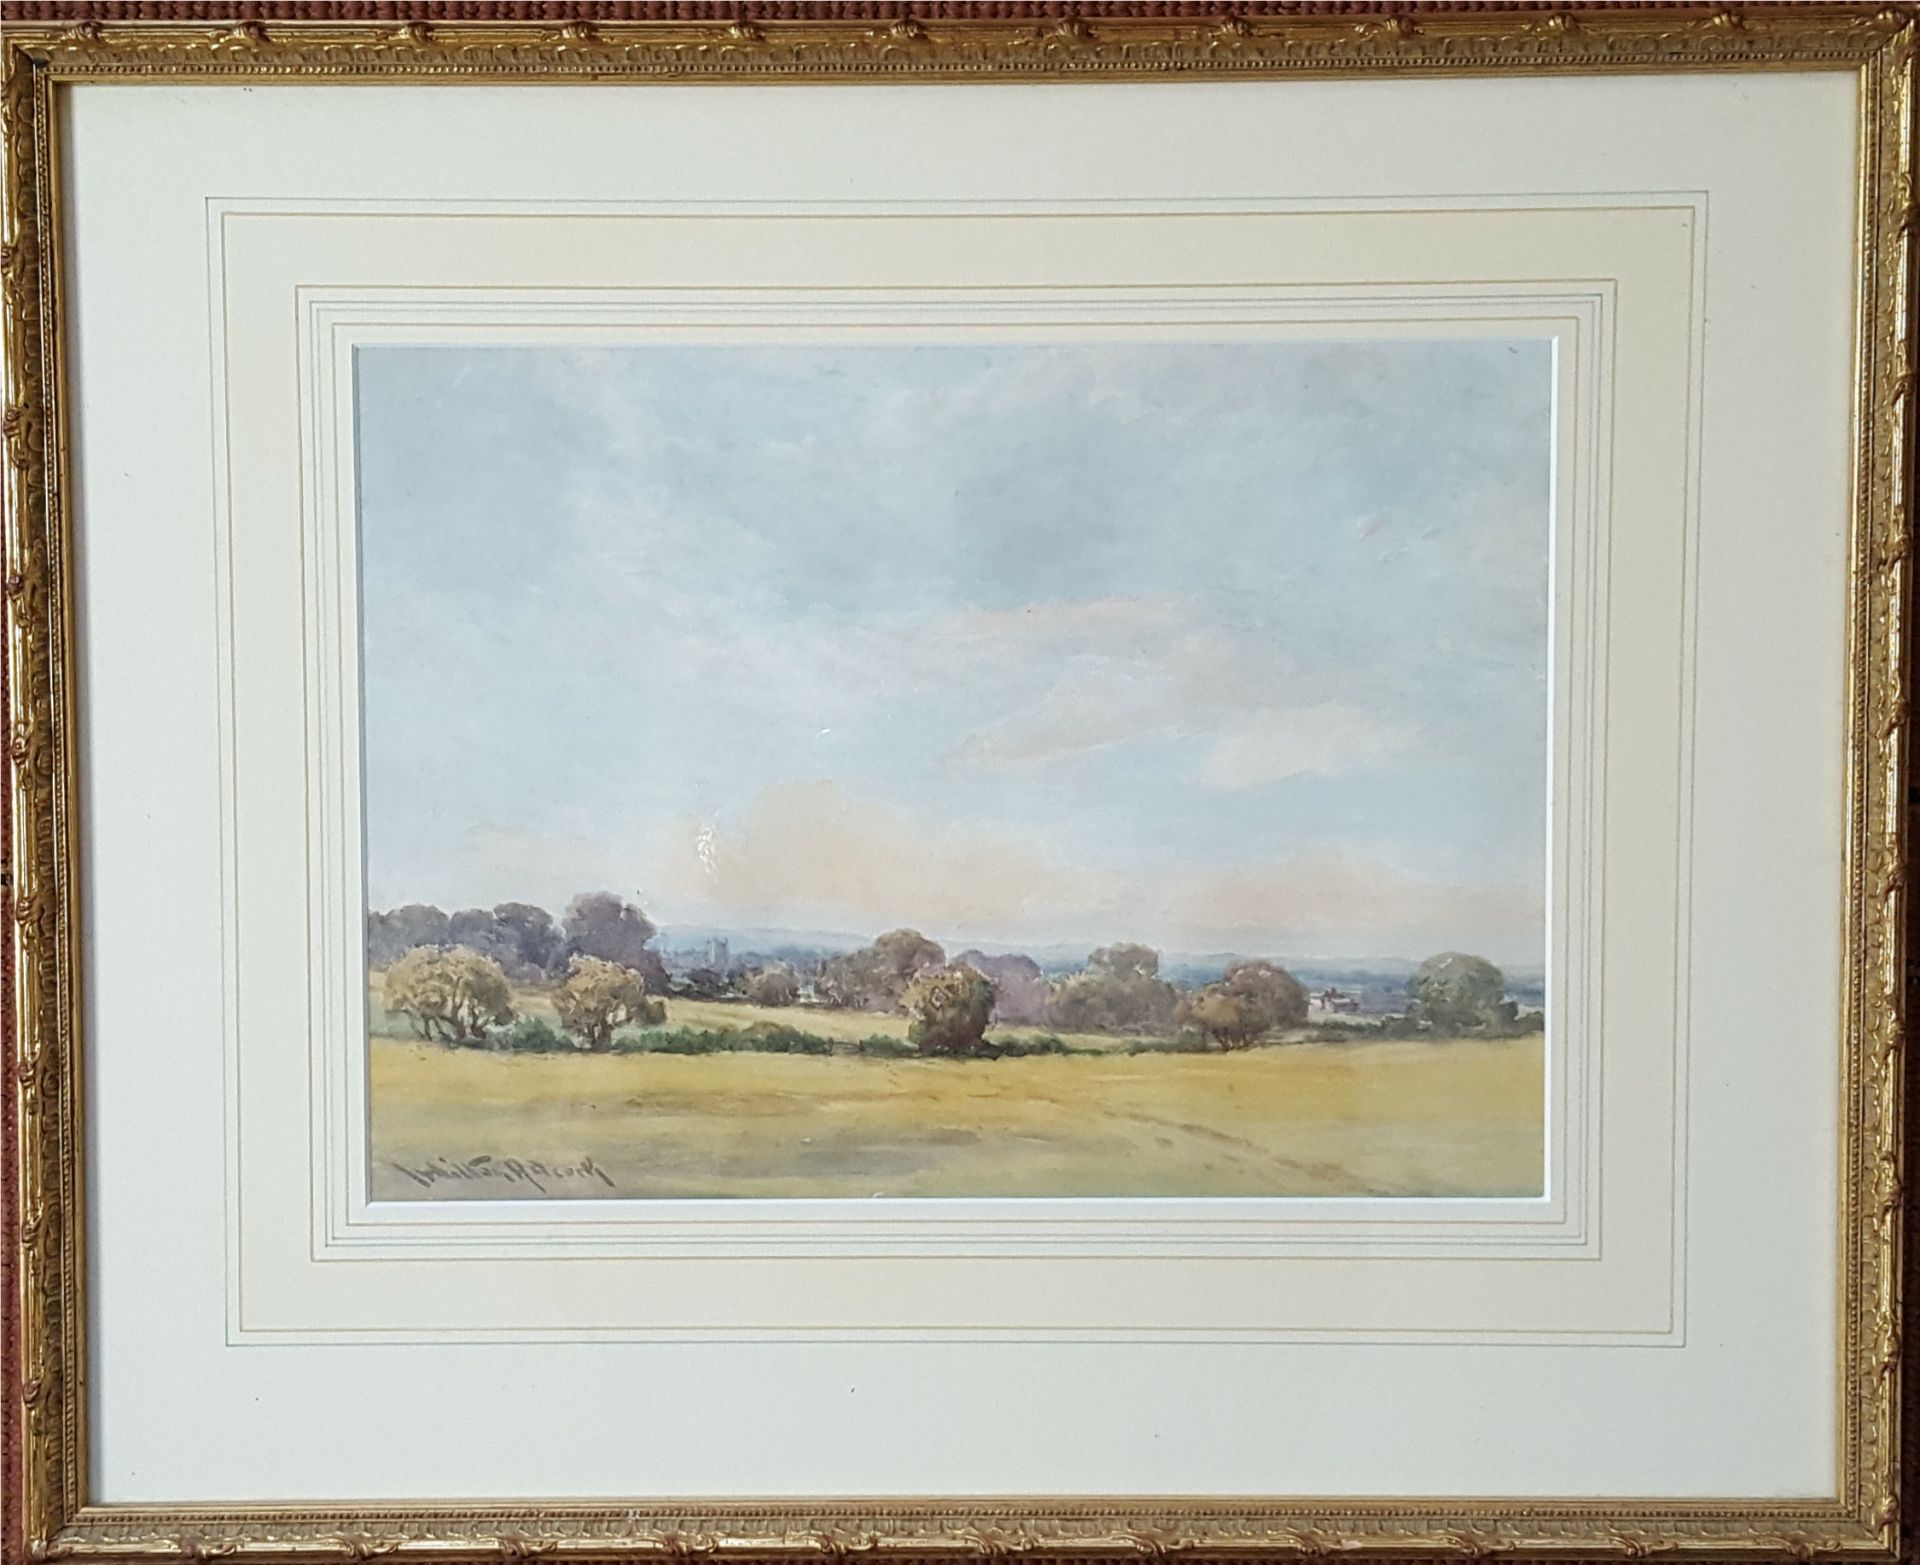 Vintage Retro Watercolour Painting Country Scene. Signed Lower Left Allcock